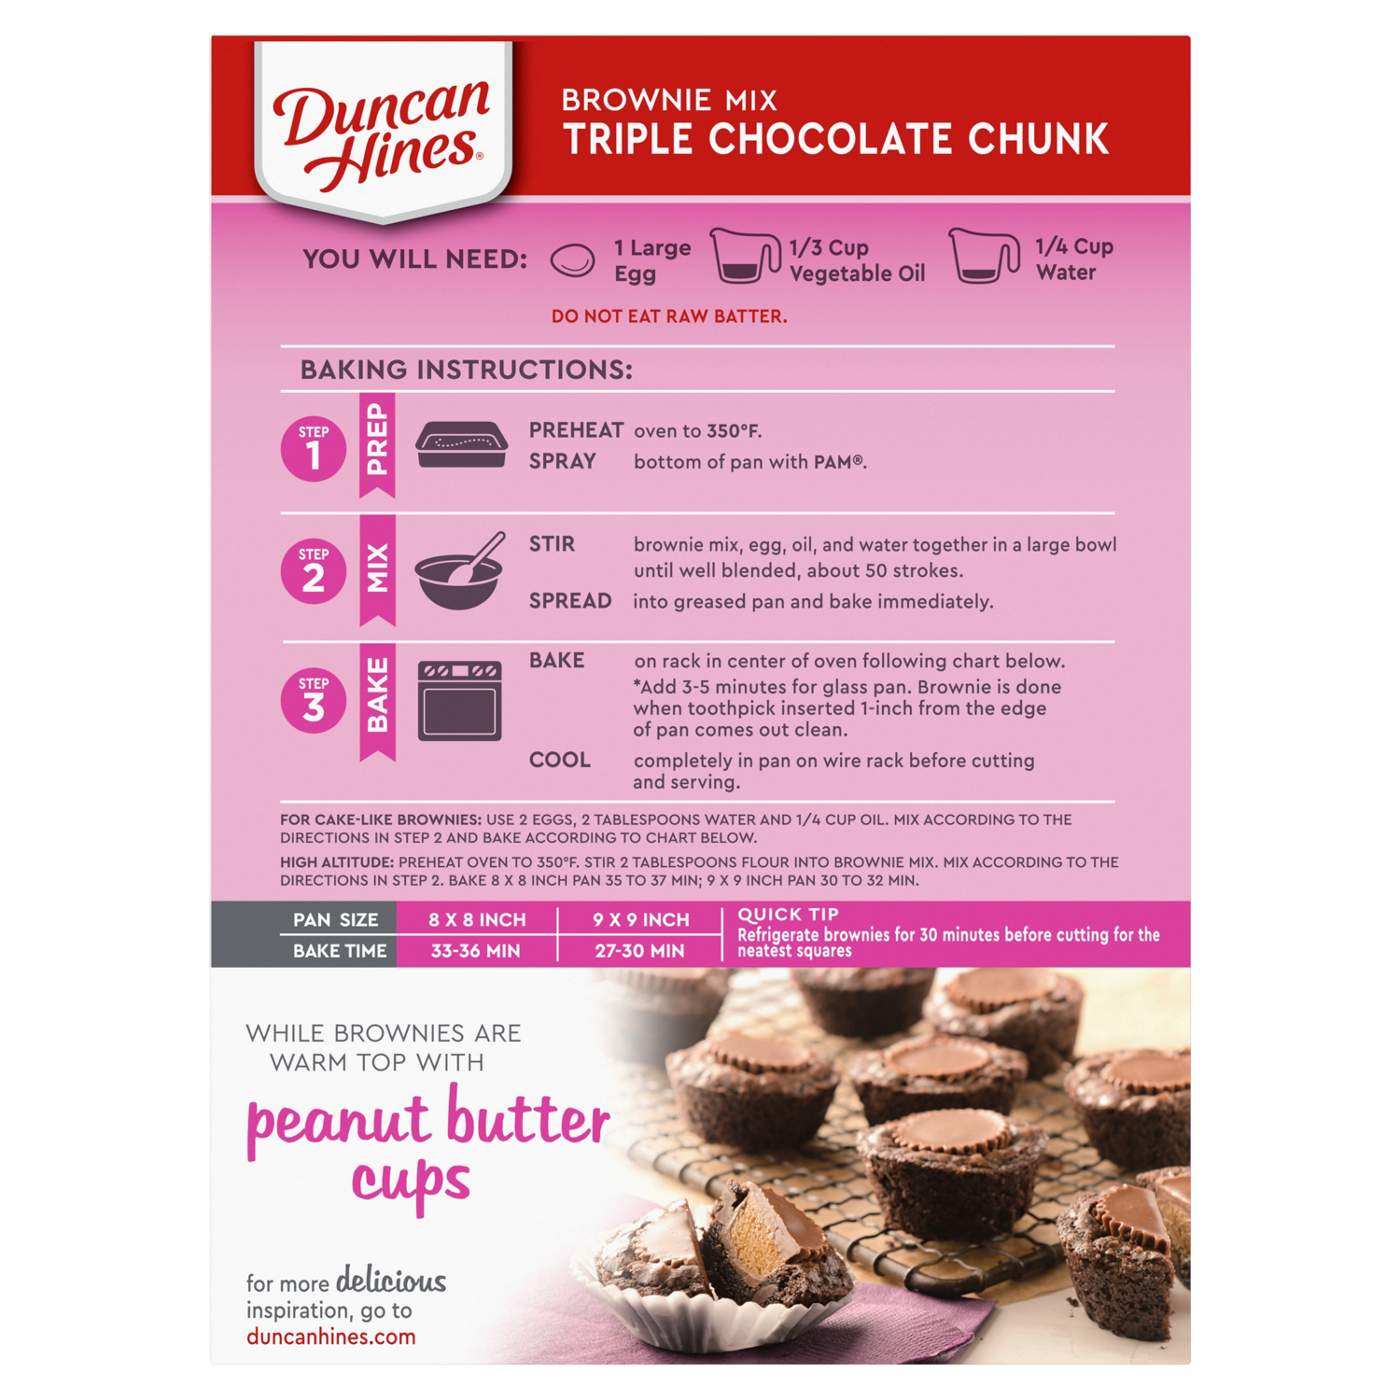 Duncan Hines Signature Triple Chocolate Chunk Brownie Mix; image 7 of 7